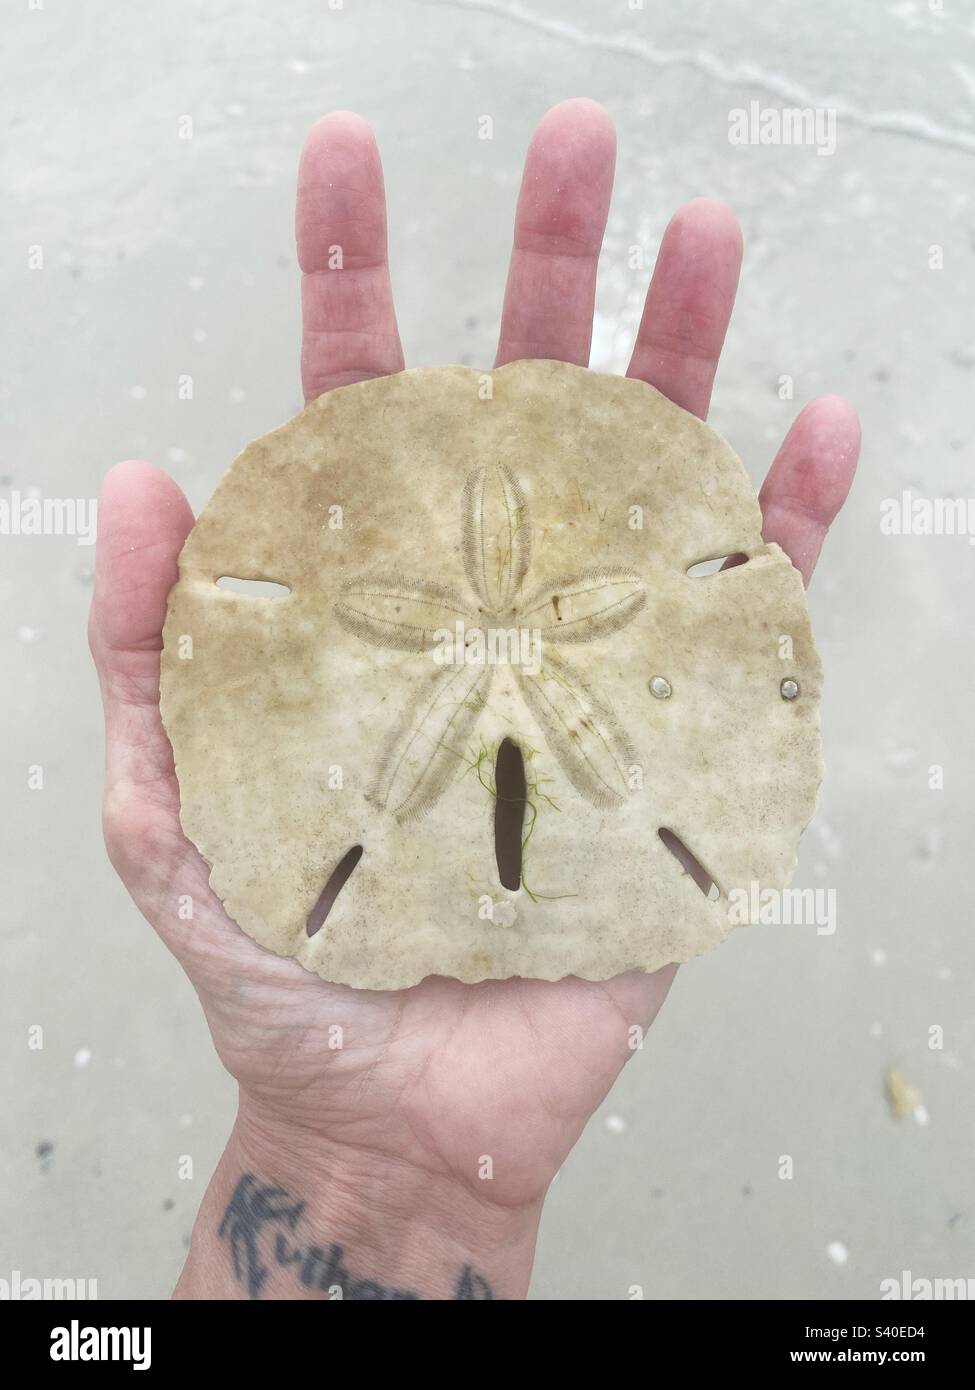 A large sand dollar in the palm of a hand, found on Dickman's Island in the Ten Thousand Islands in Florida. Stock Photo